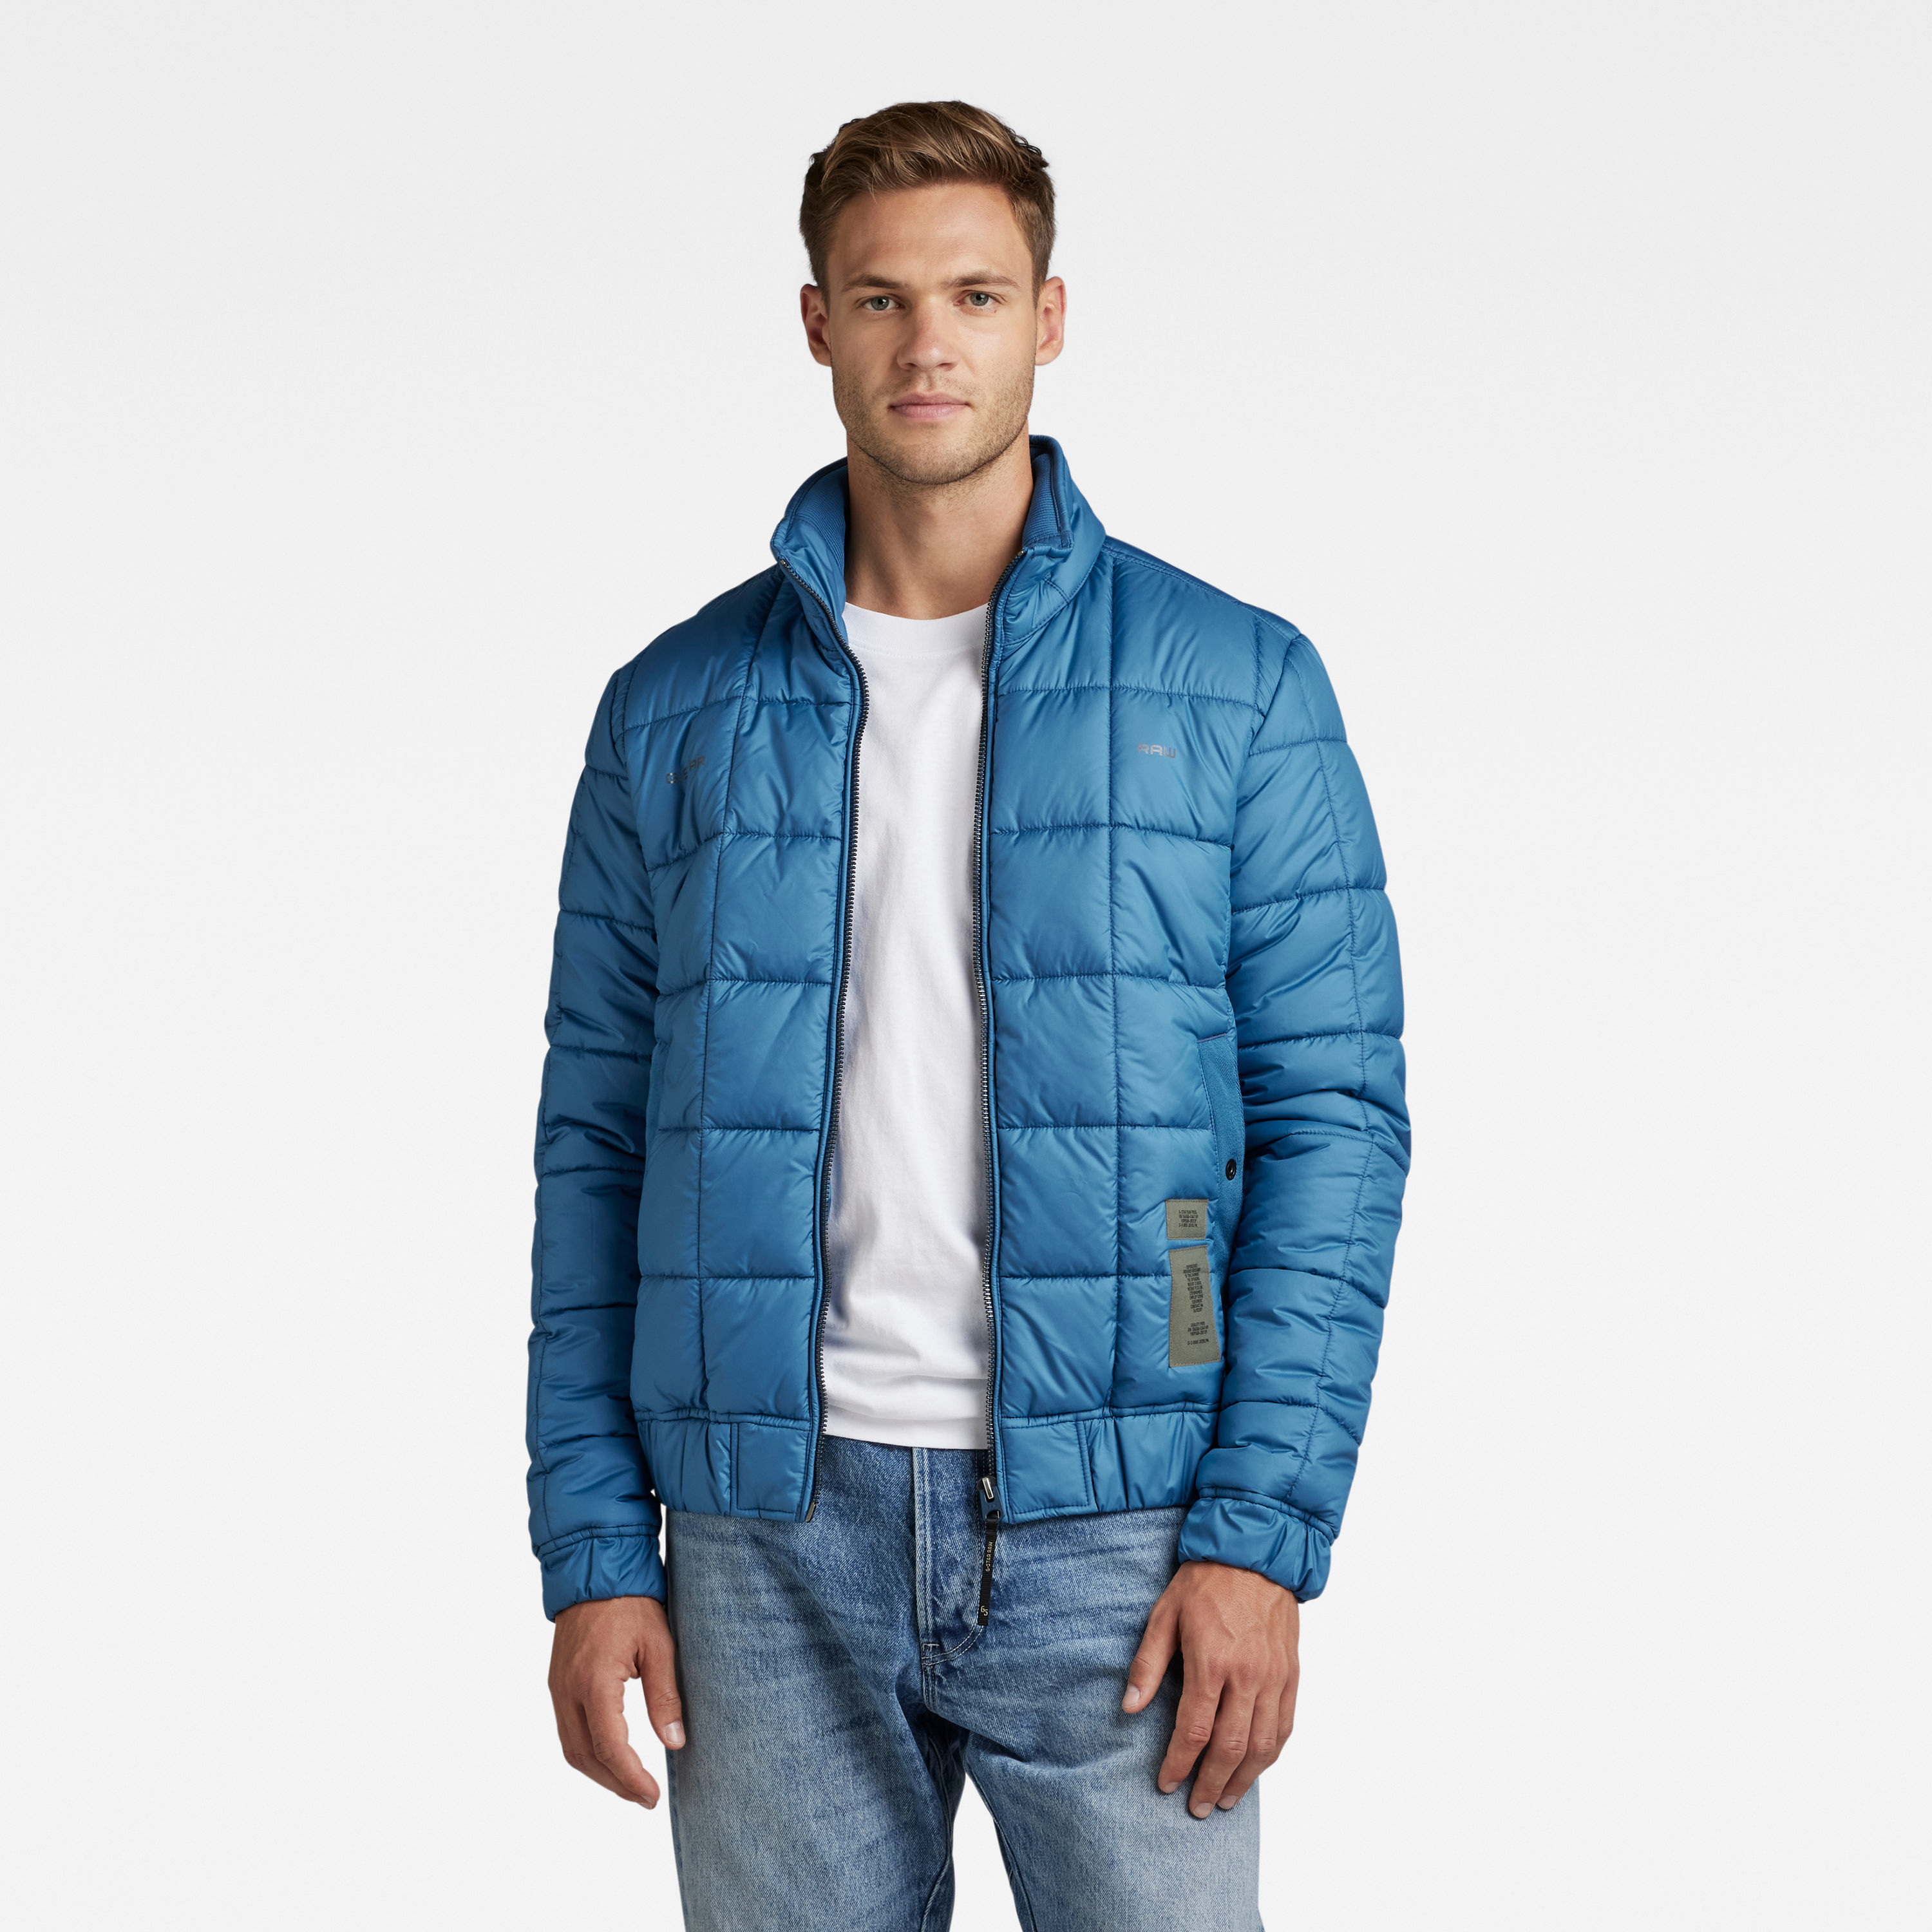 CAZADORA ACOLCHADA HOMBRE G-STAR MEEFIC SQUARED QUILTED